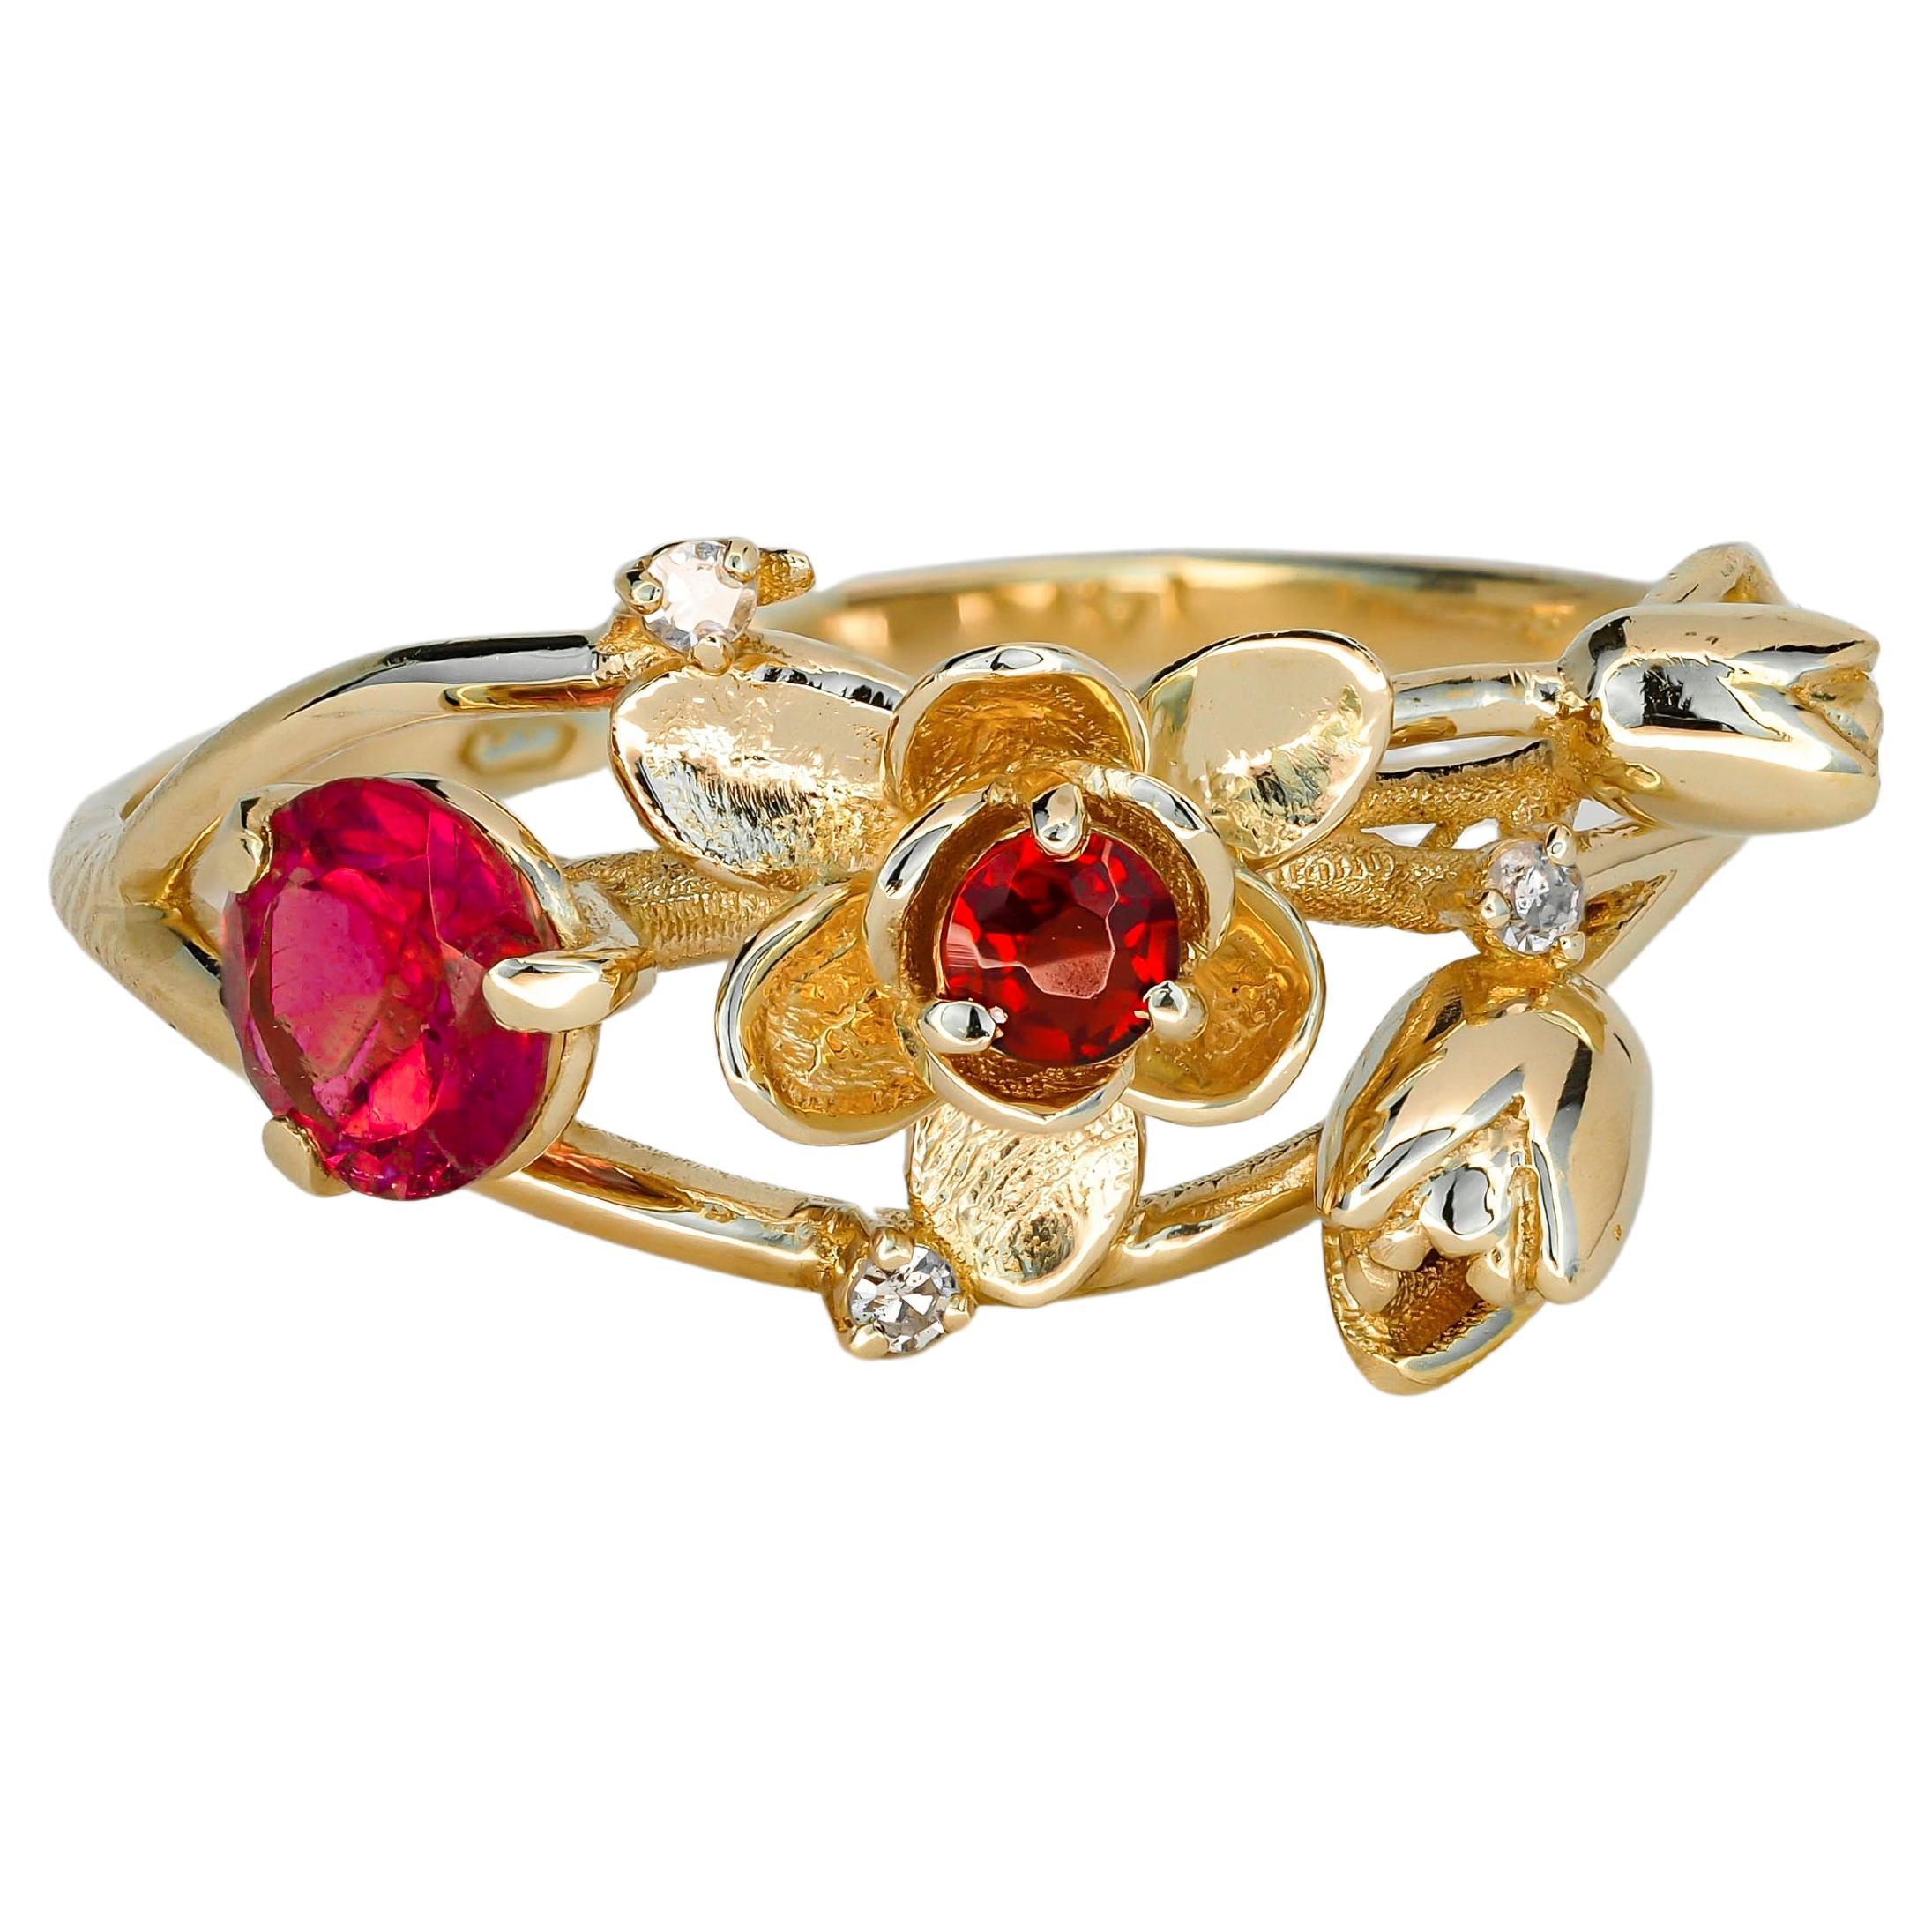 Ruby Ring, 14k Gold Ring with Ruby, Garnet and Diamonds, Orchid Flower Ring